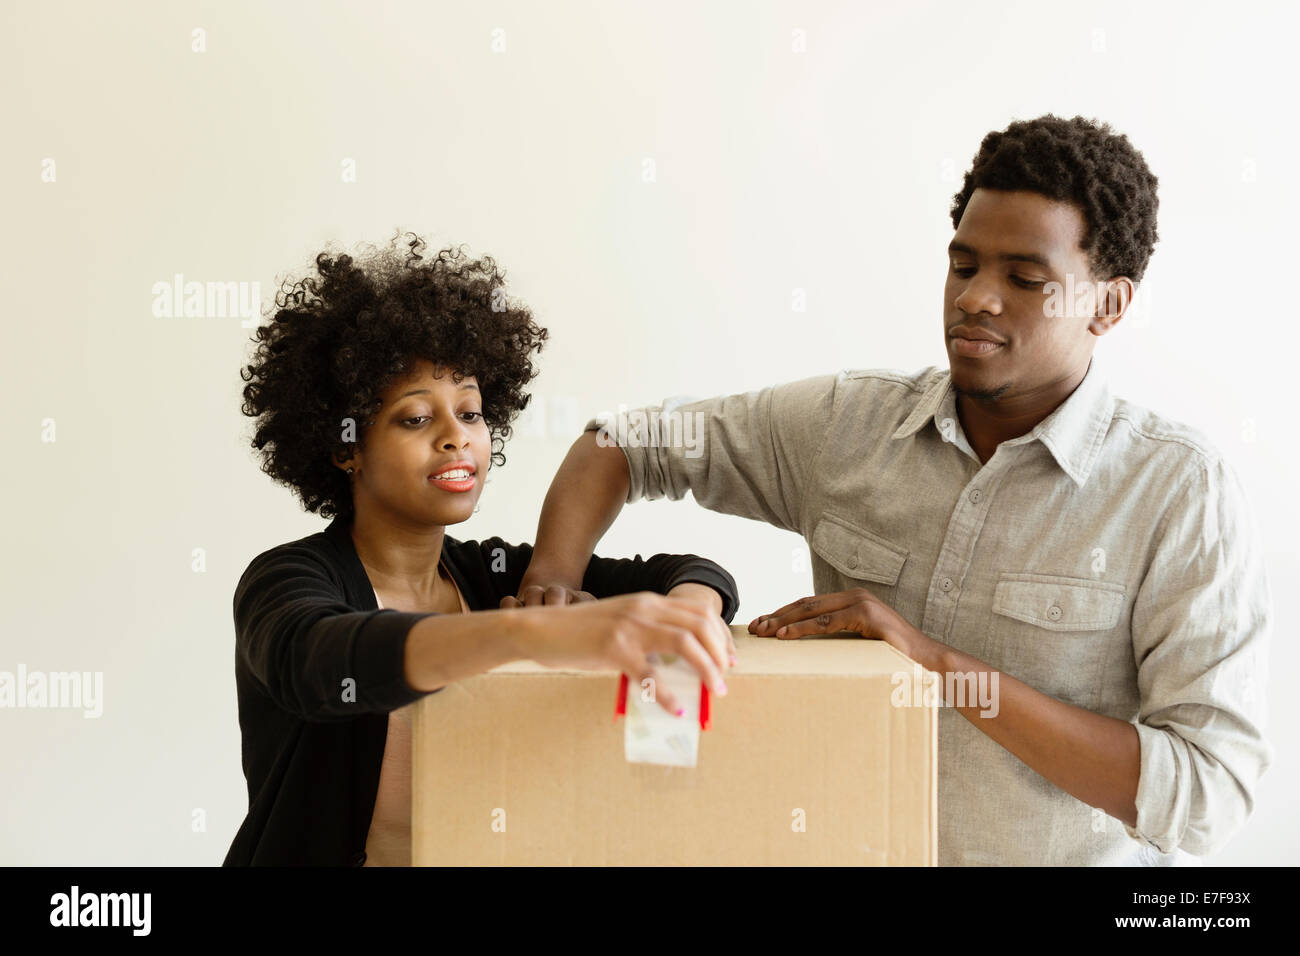 Couple packing cardboard box Banque D'Images